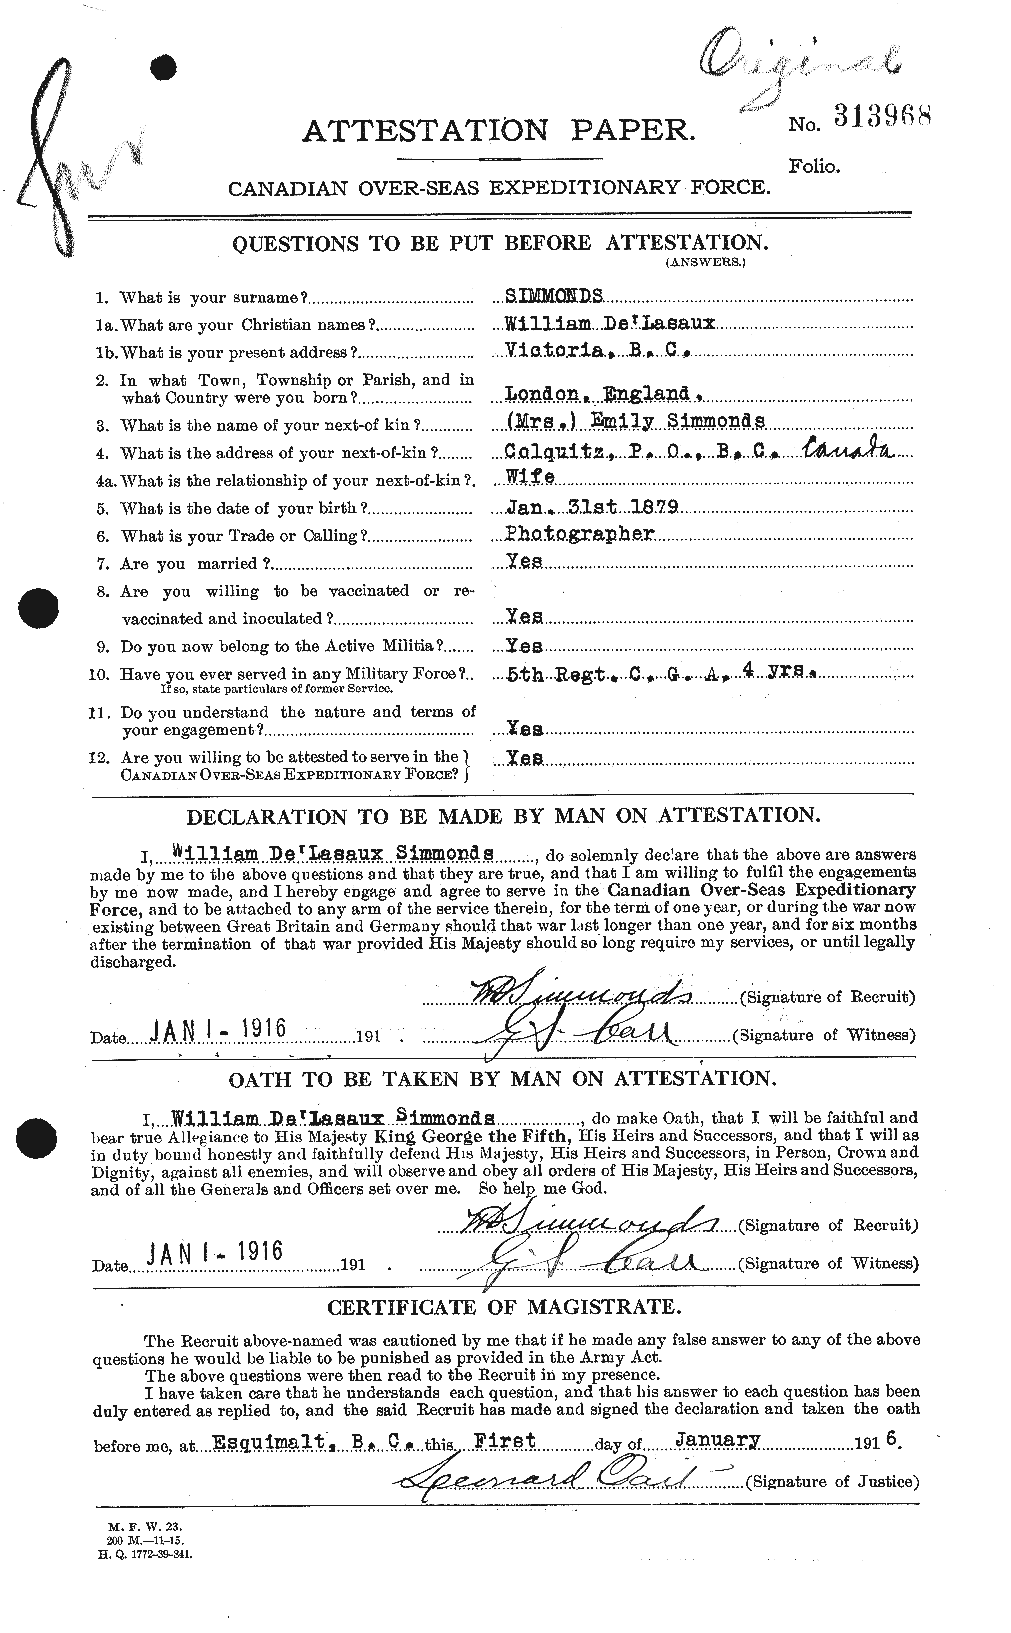 Personnel Records of the First World War - CEF 099184a